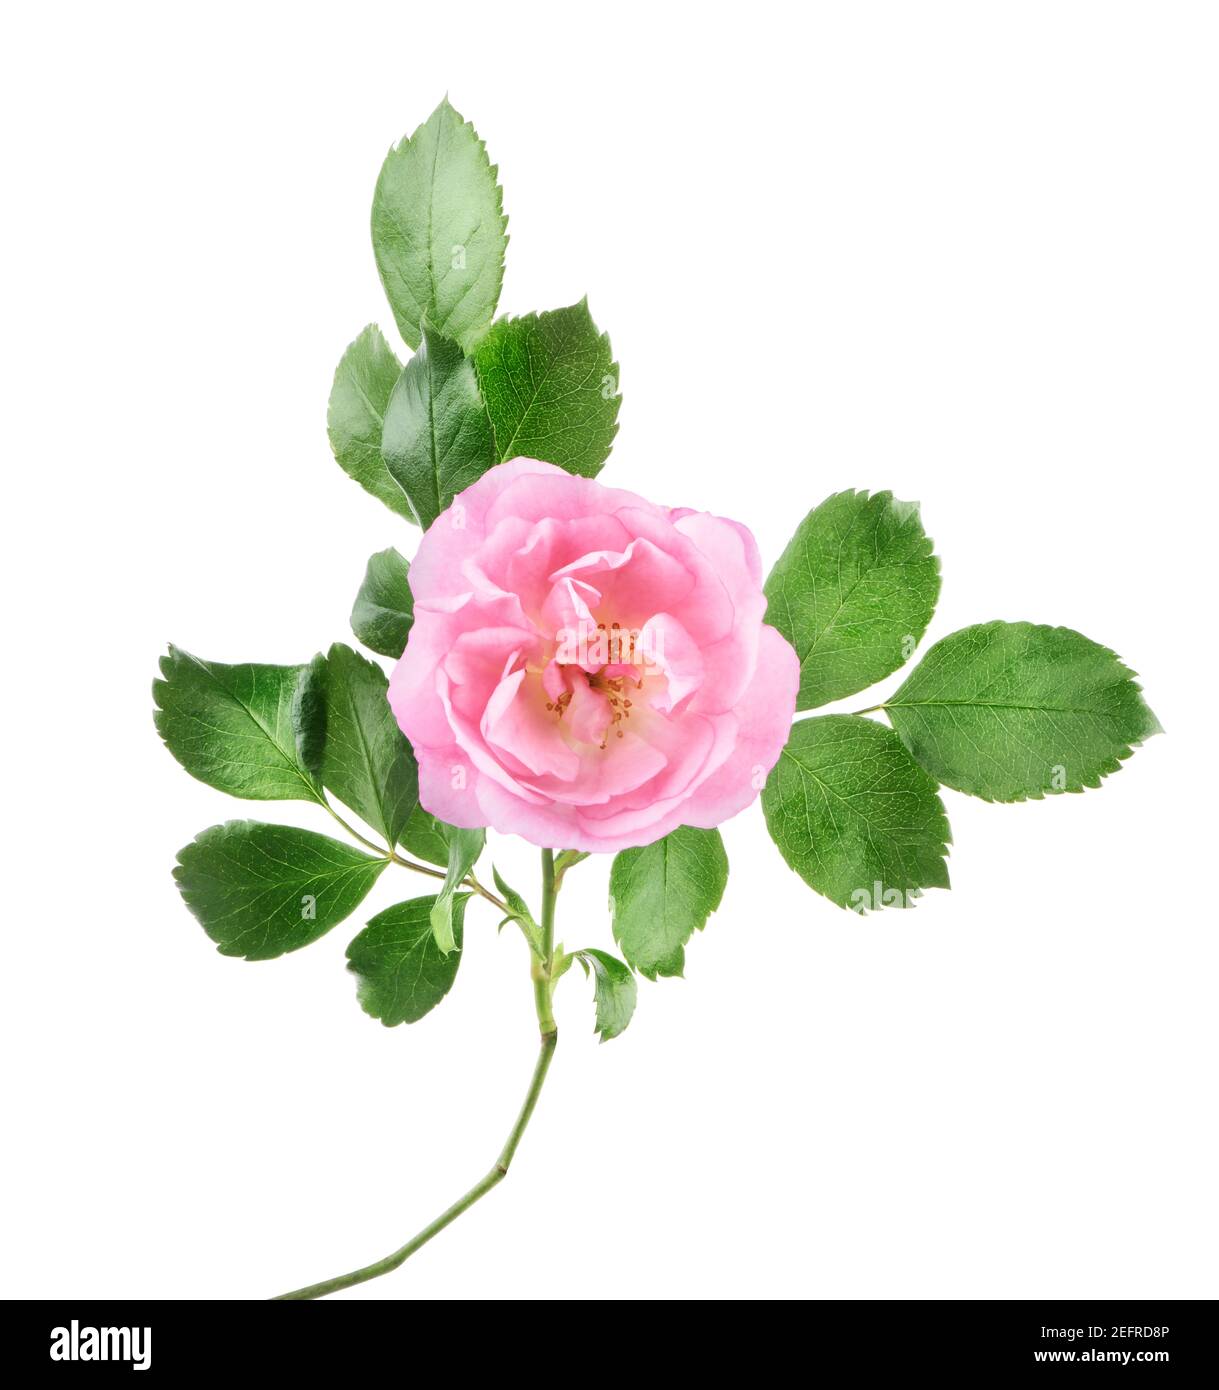 Pink Damask Rose, delicate flower with open petals on a branch with green leaves. Front view. Garden rose artistic closeup, isolated on white studio b Stock Photo